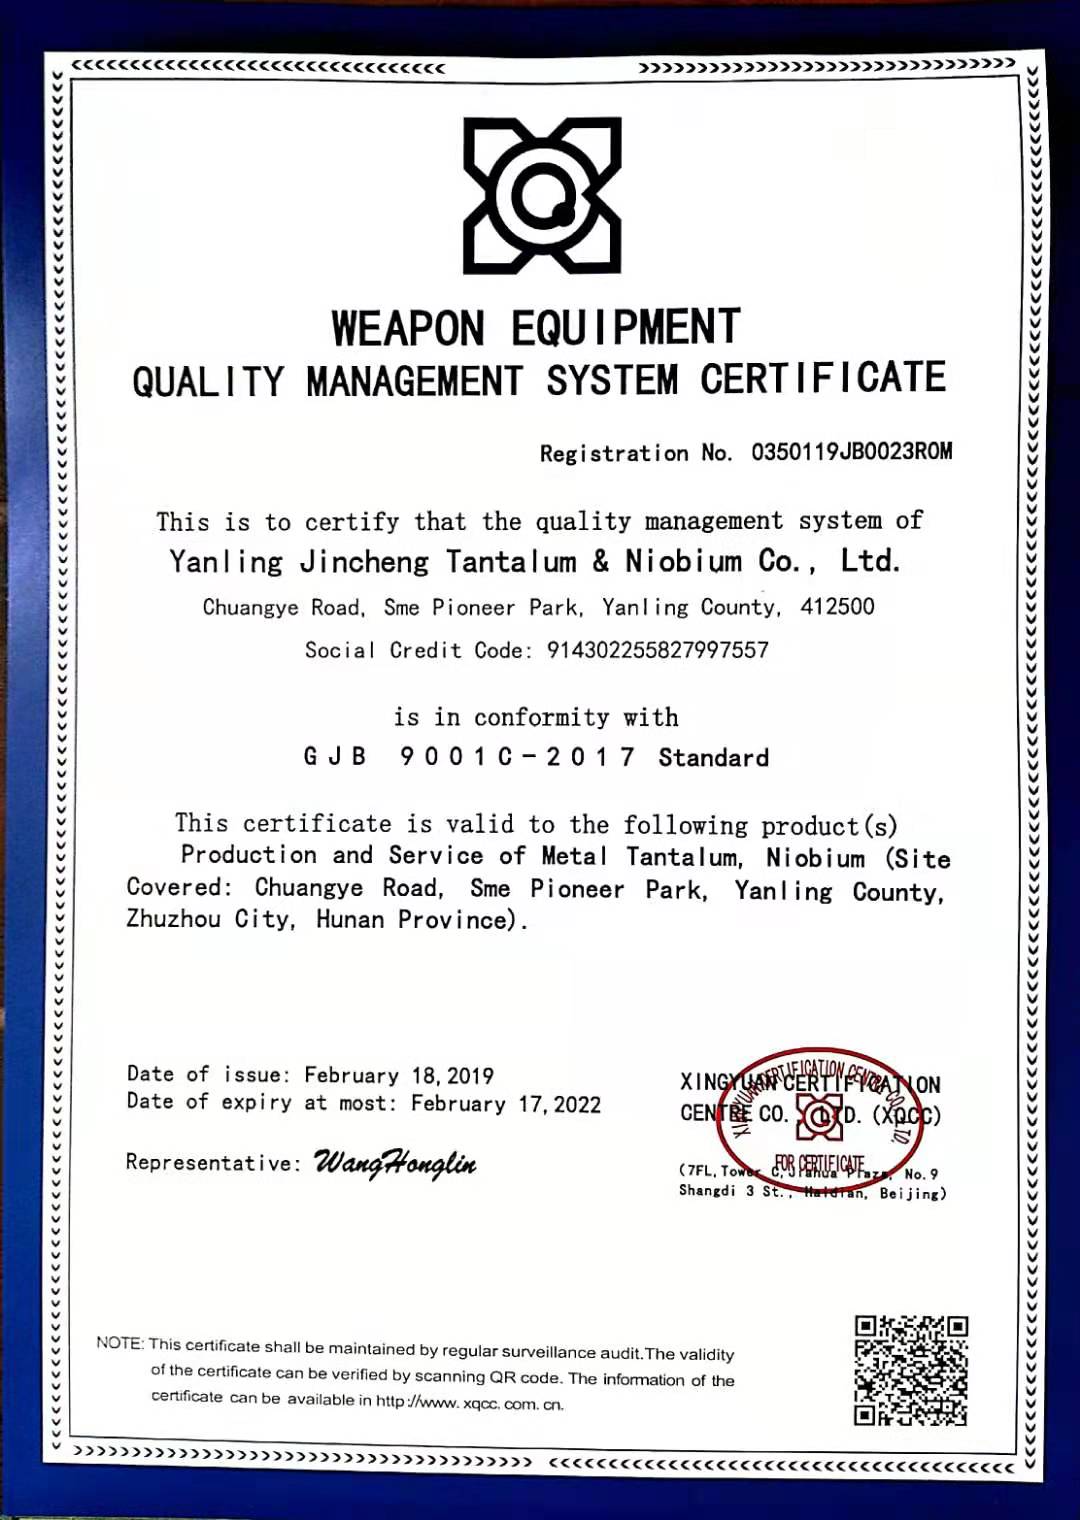 WEAPON EQUIPMENT QUALITY MANAGEMENT SYSTEM